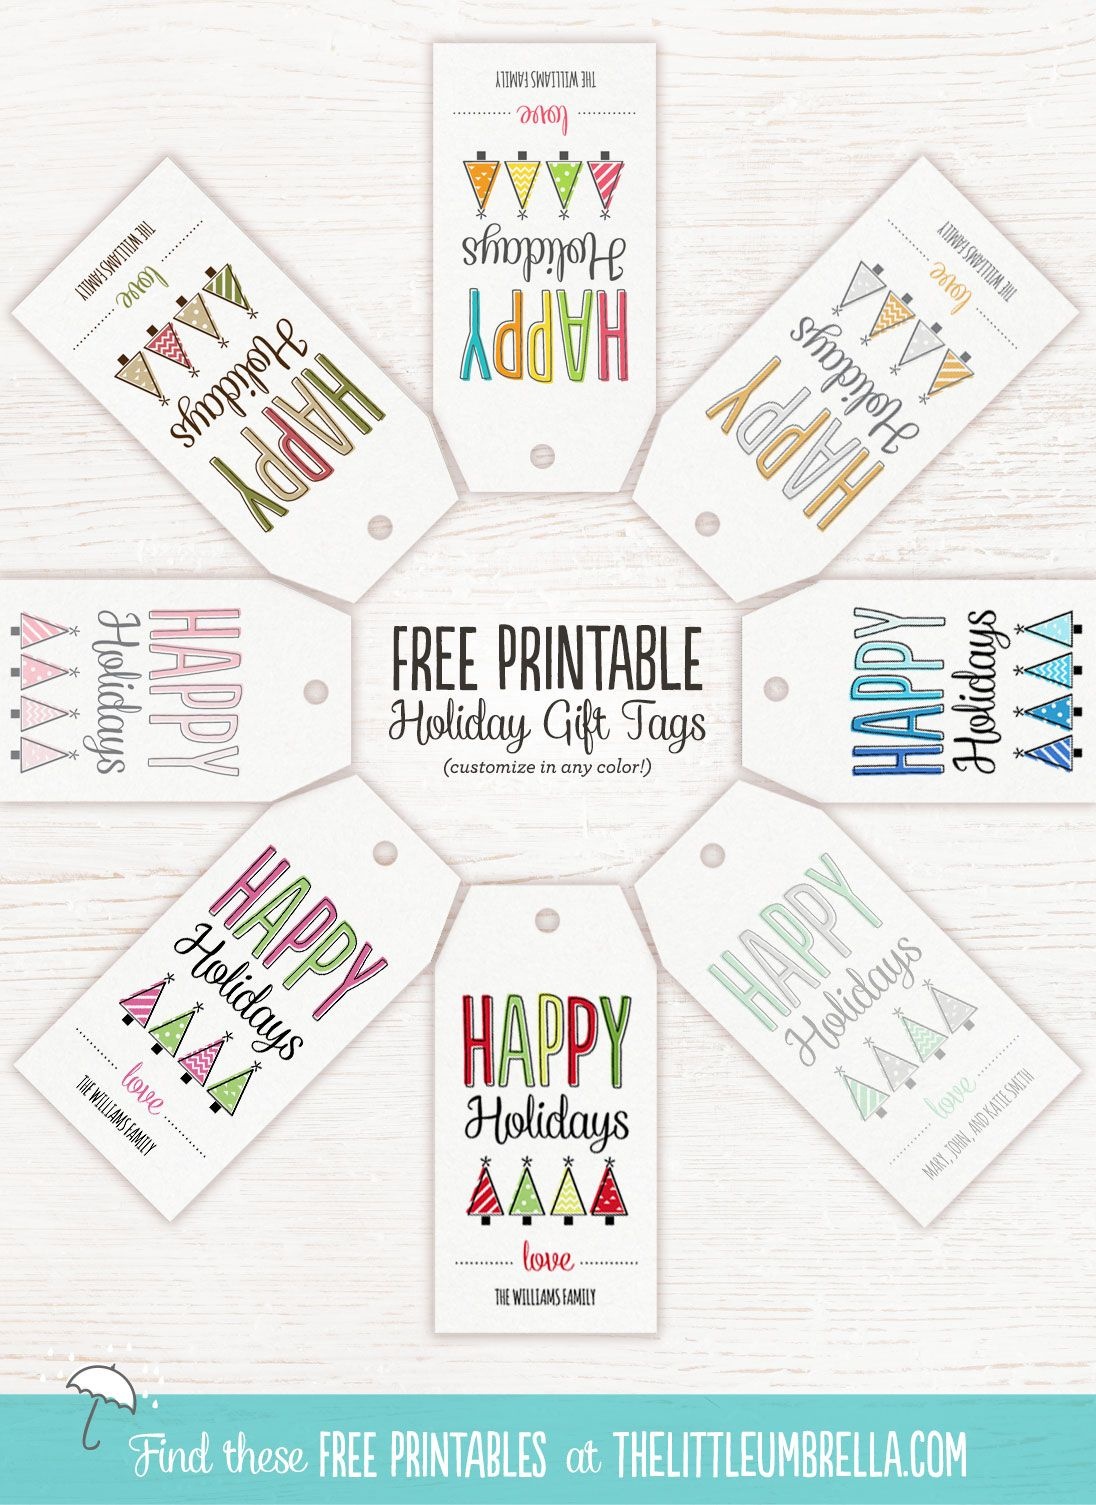 Free Printable Holiday Gift Tags At The Little Umbrella. Customize - Free Printable Customizable Gift Tags